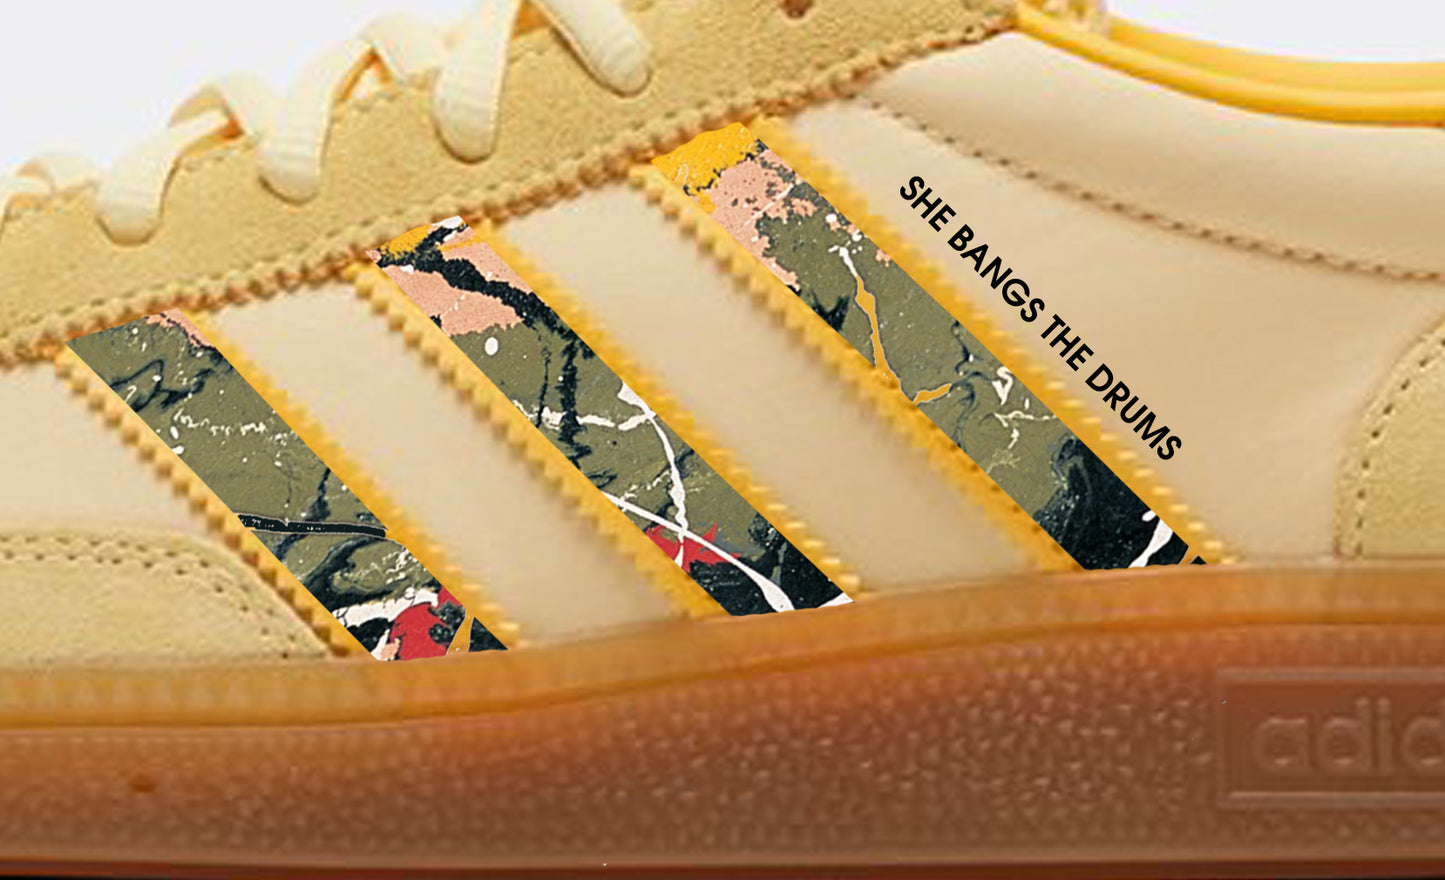 Limited edition The Stone Roses She bangs the drums custom adidas original yellow Handball Spezial trainers / sneakers.